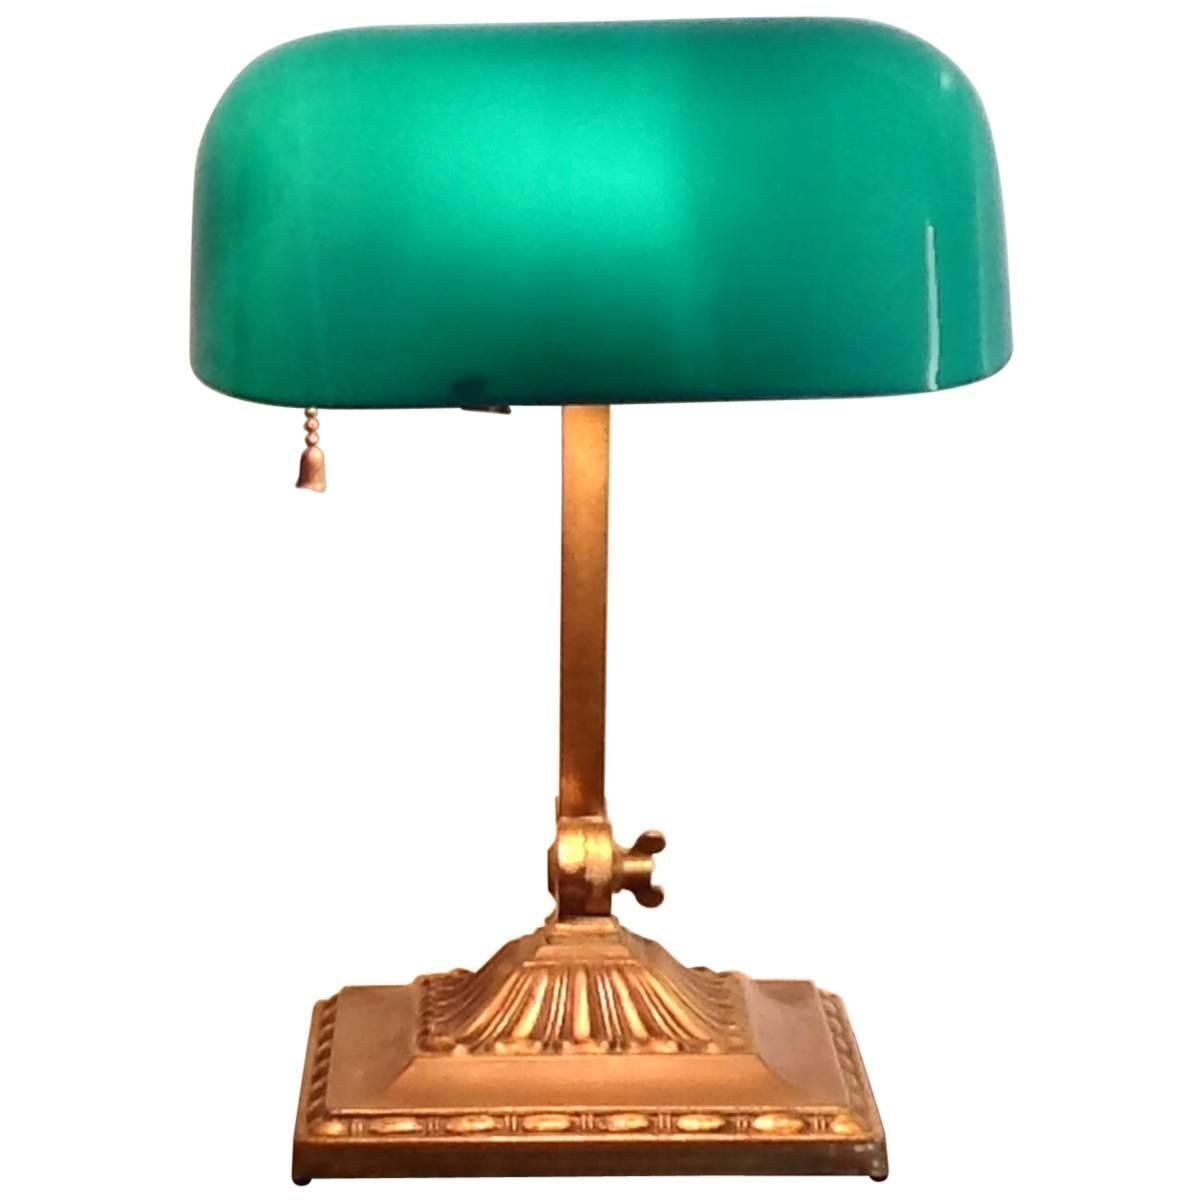 Emeralite Banker's Lamp For Sale